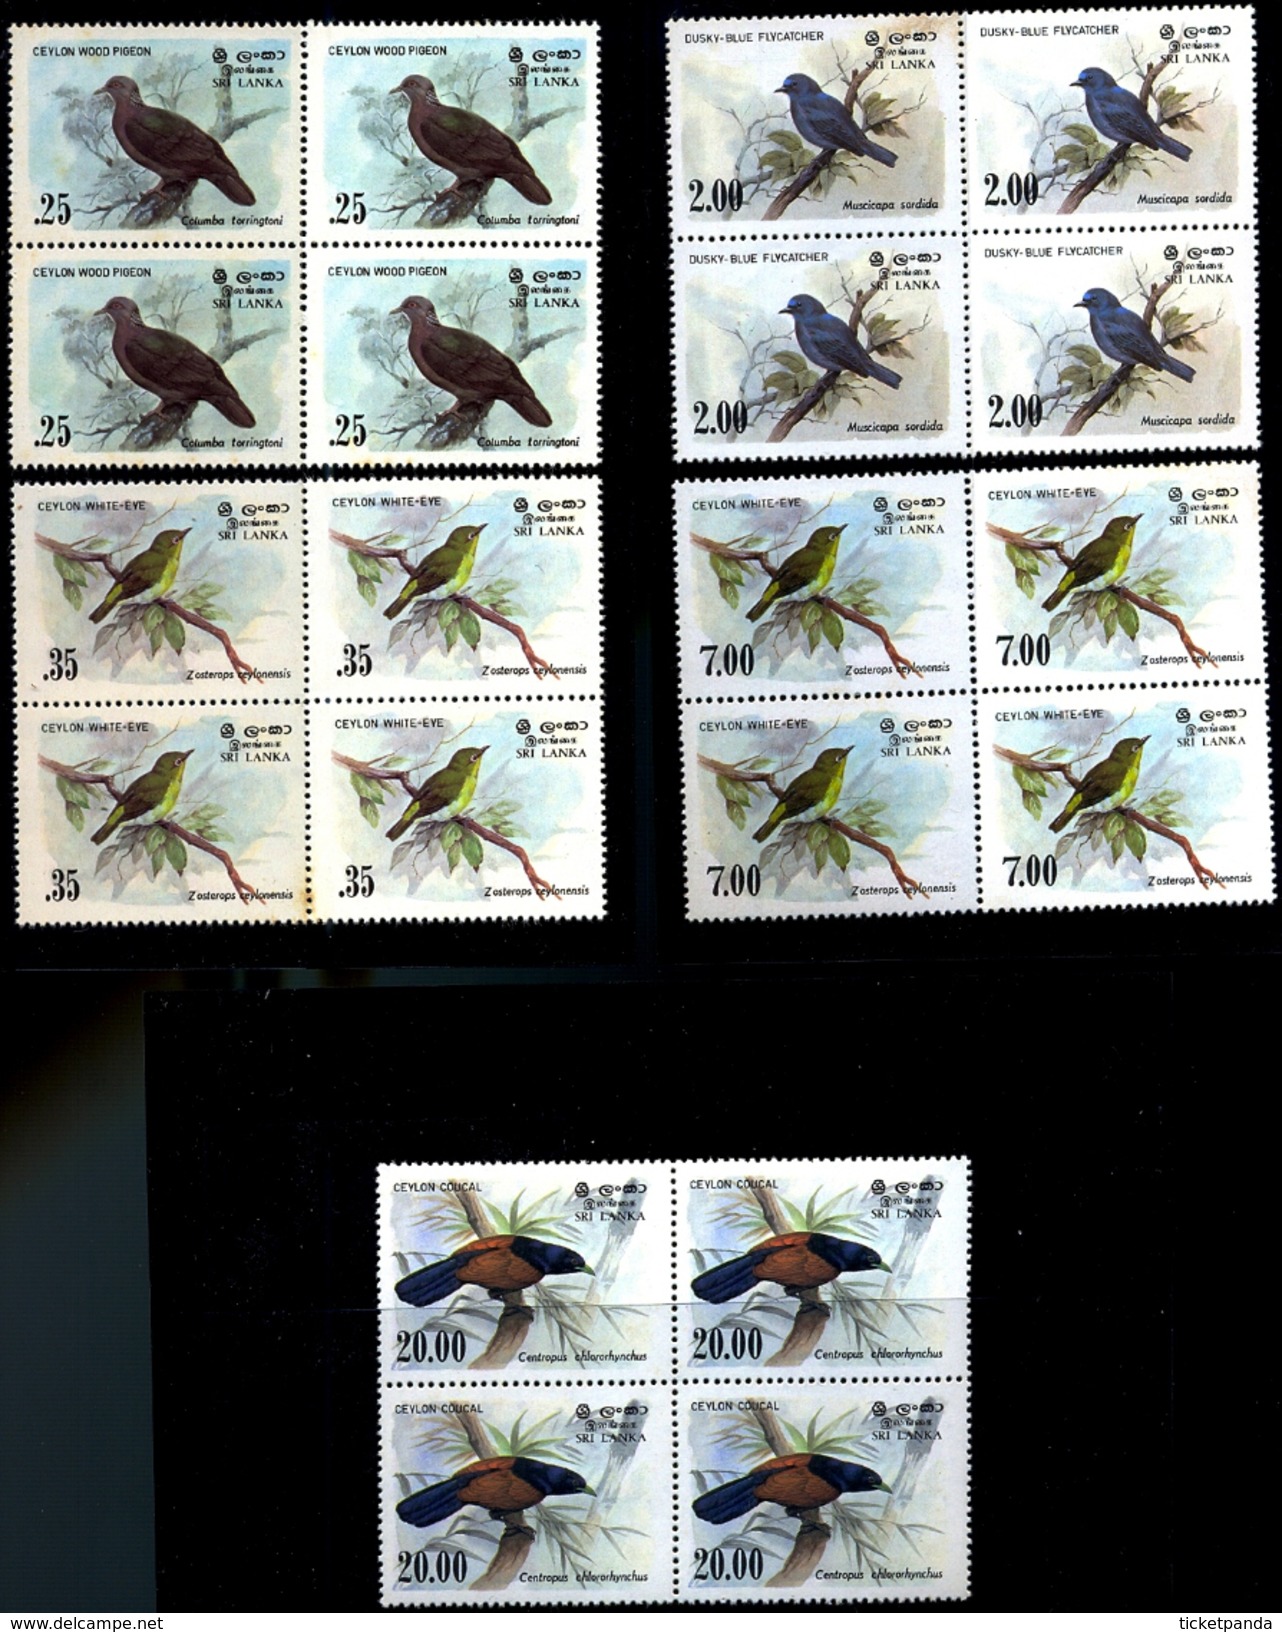 BIRDS OF CEYLON WOOD PIGEON, WHITE EYE, FLYCATCHER& COUCAL-SET OF 5 IN BLOCKS OF 4-MNH-H1-201 - Cuco, Cuclillos